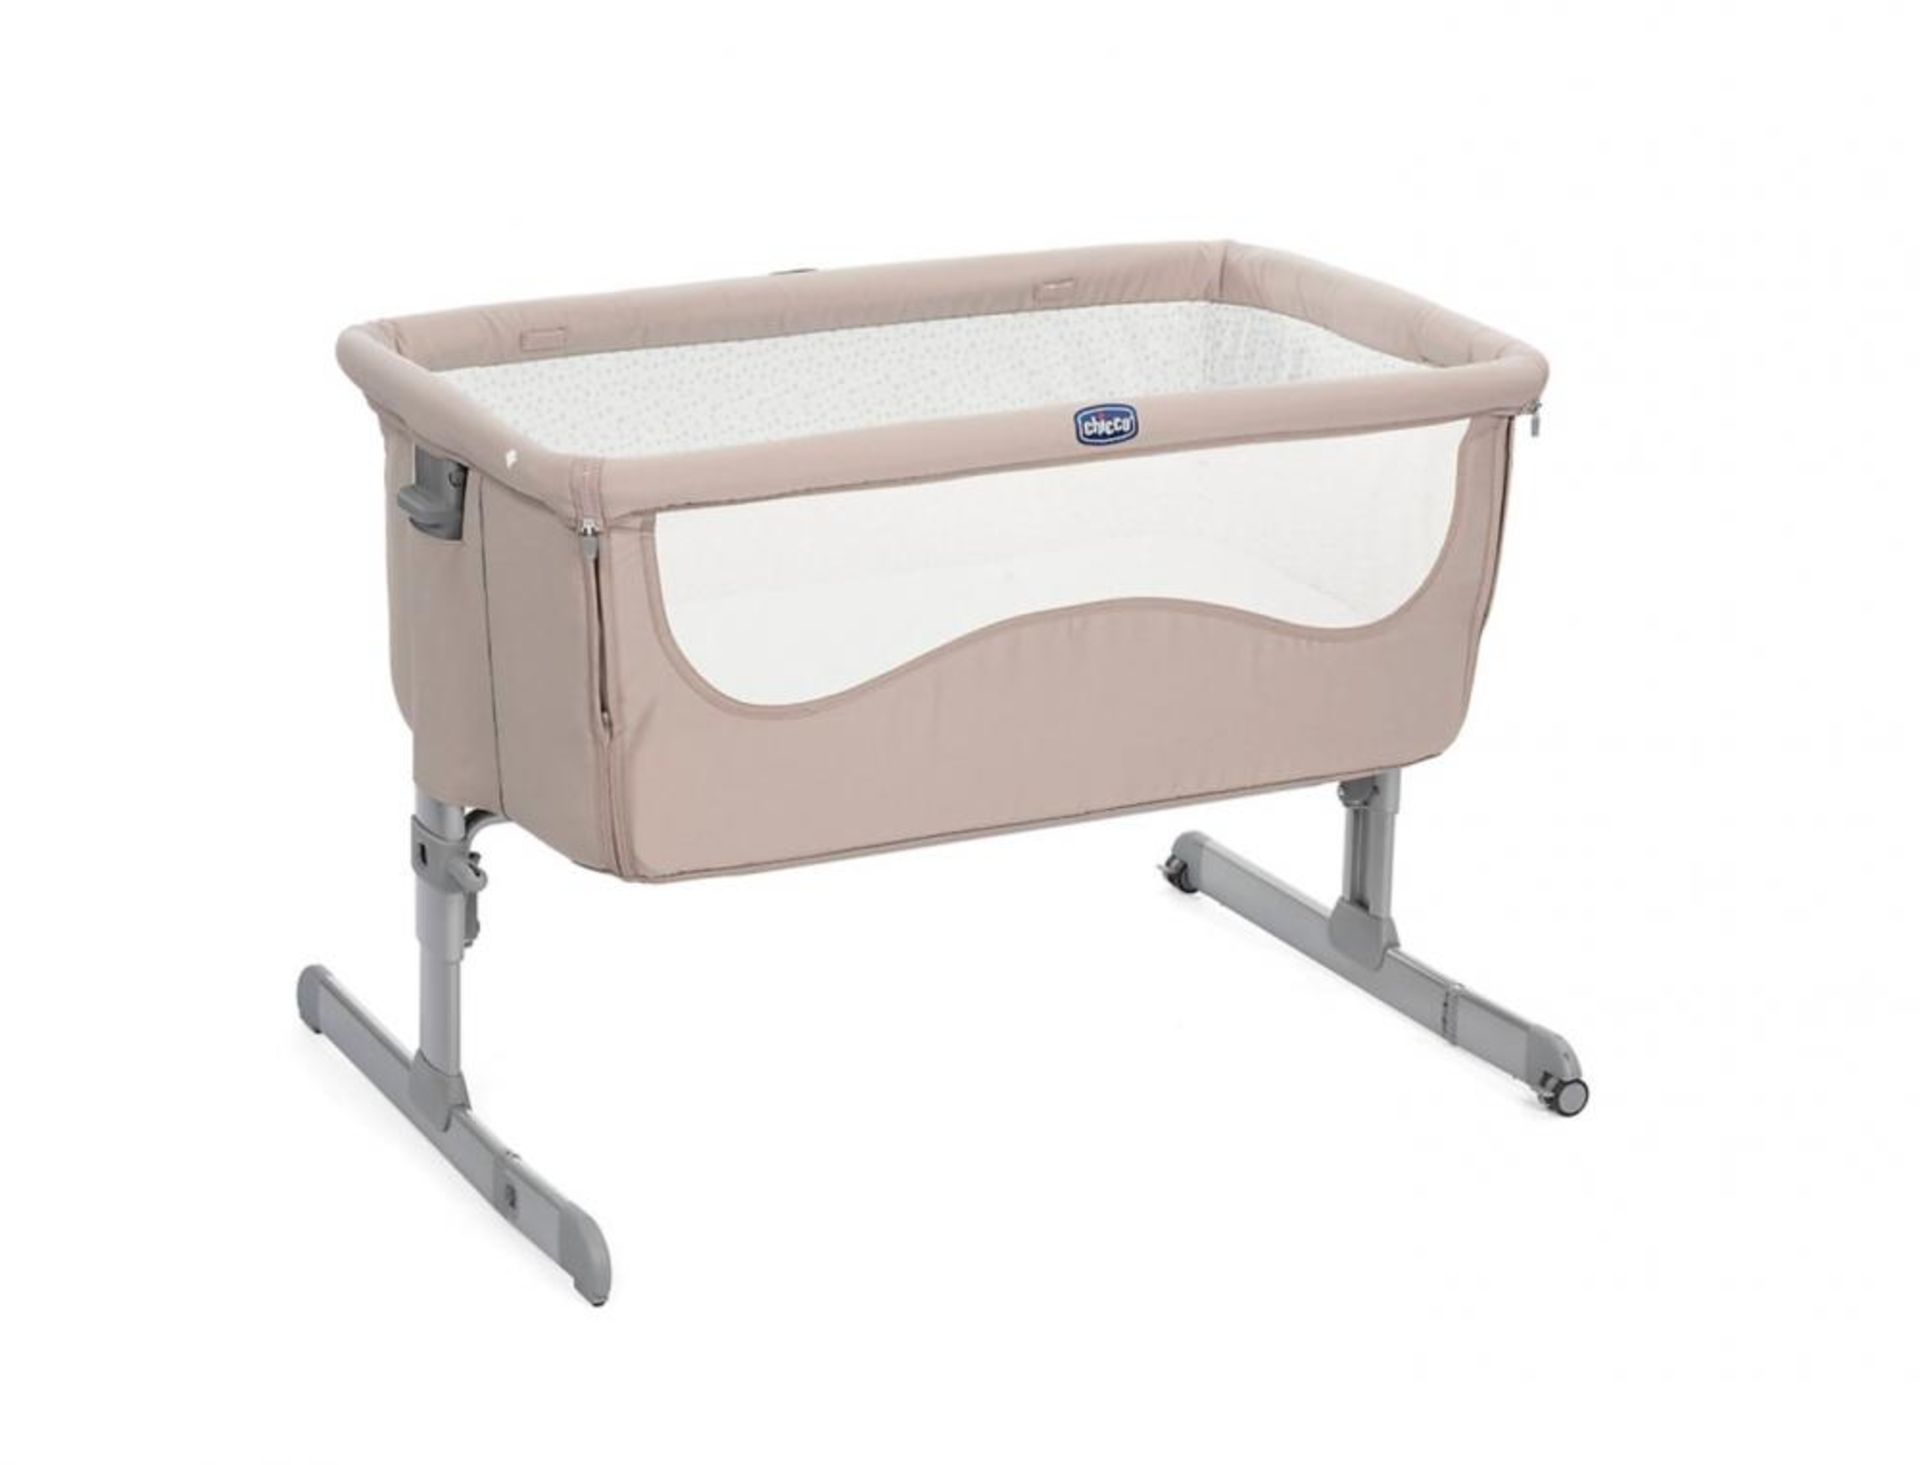 1 x Chicco Next2me Chick to Chick Bedside Baby Crib - Brand New 2019 Sealed Stock - Includes Mattres